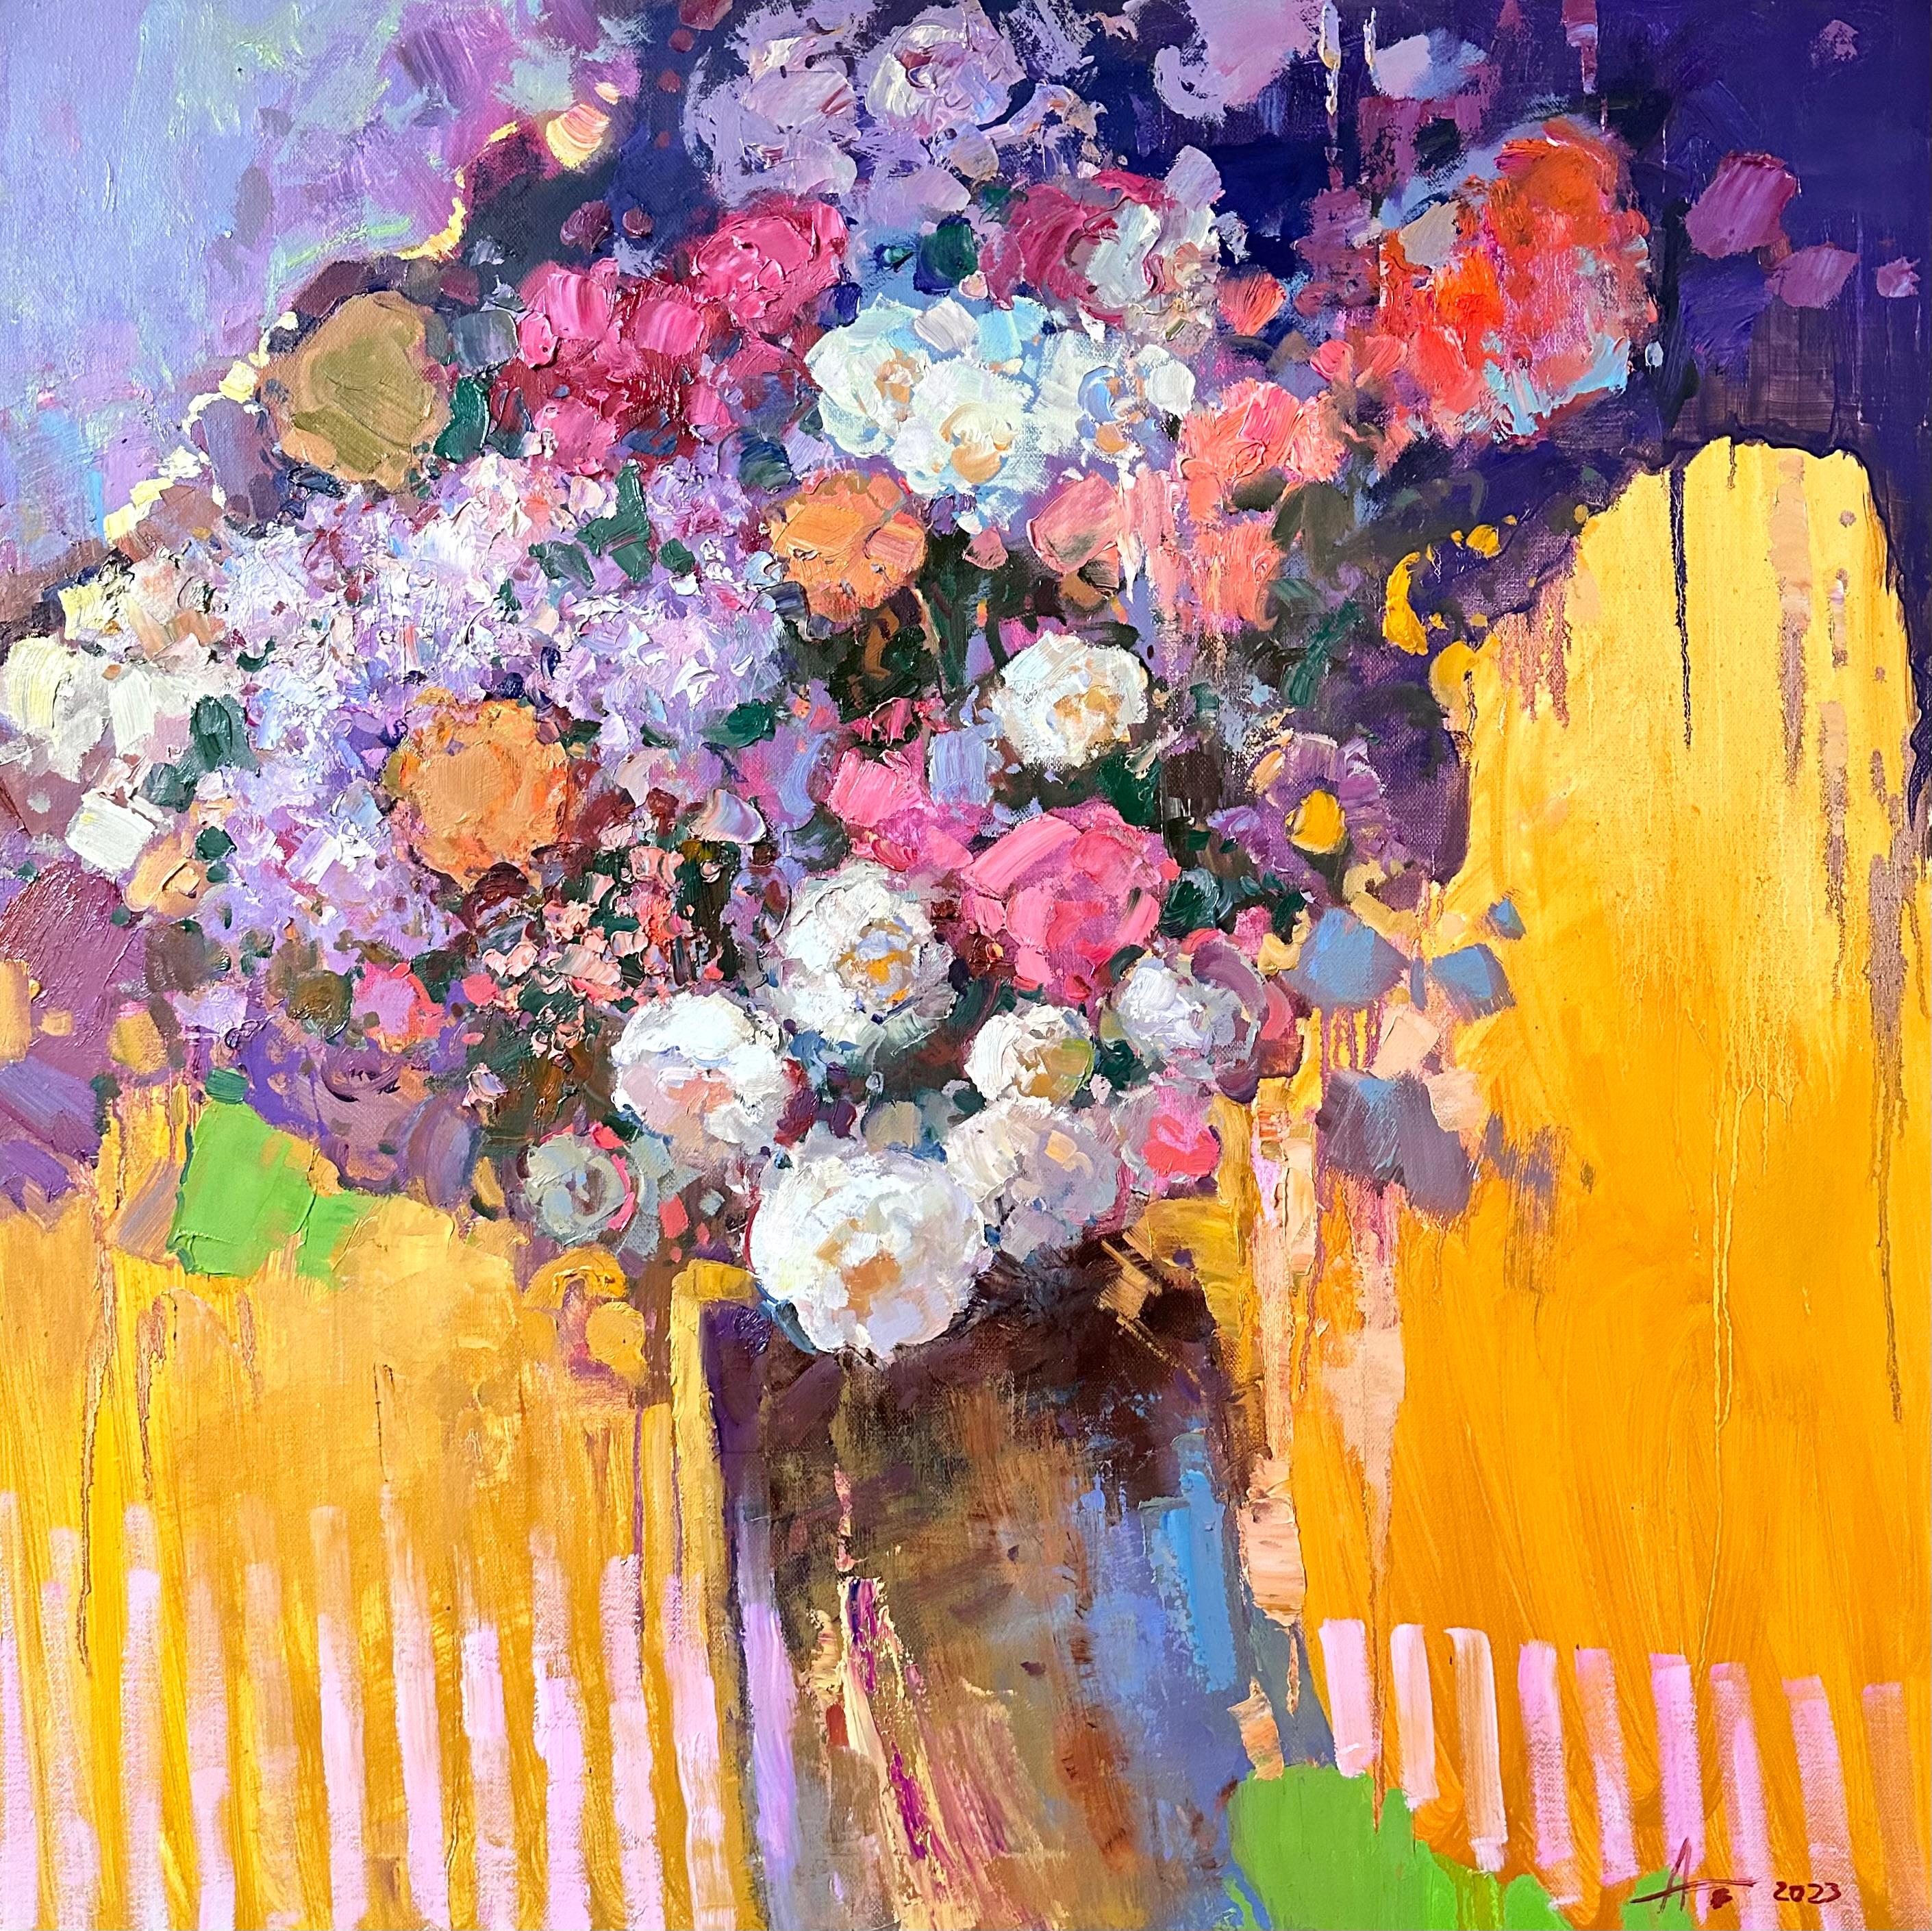 Bouquet on gold Original Oil Painting with Flowers by Andrei Belaichuk